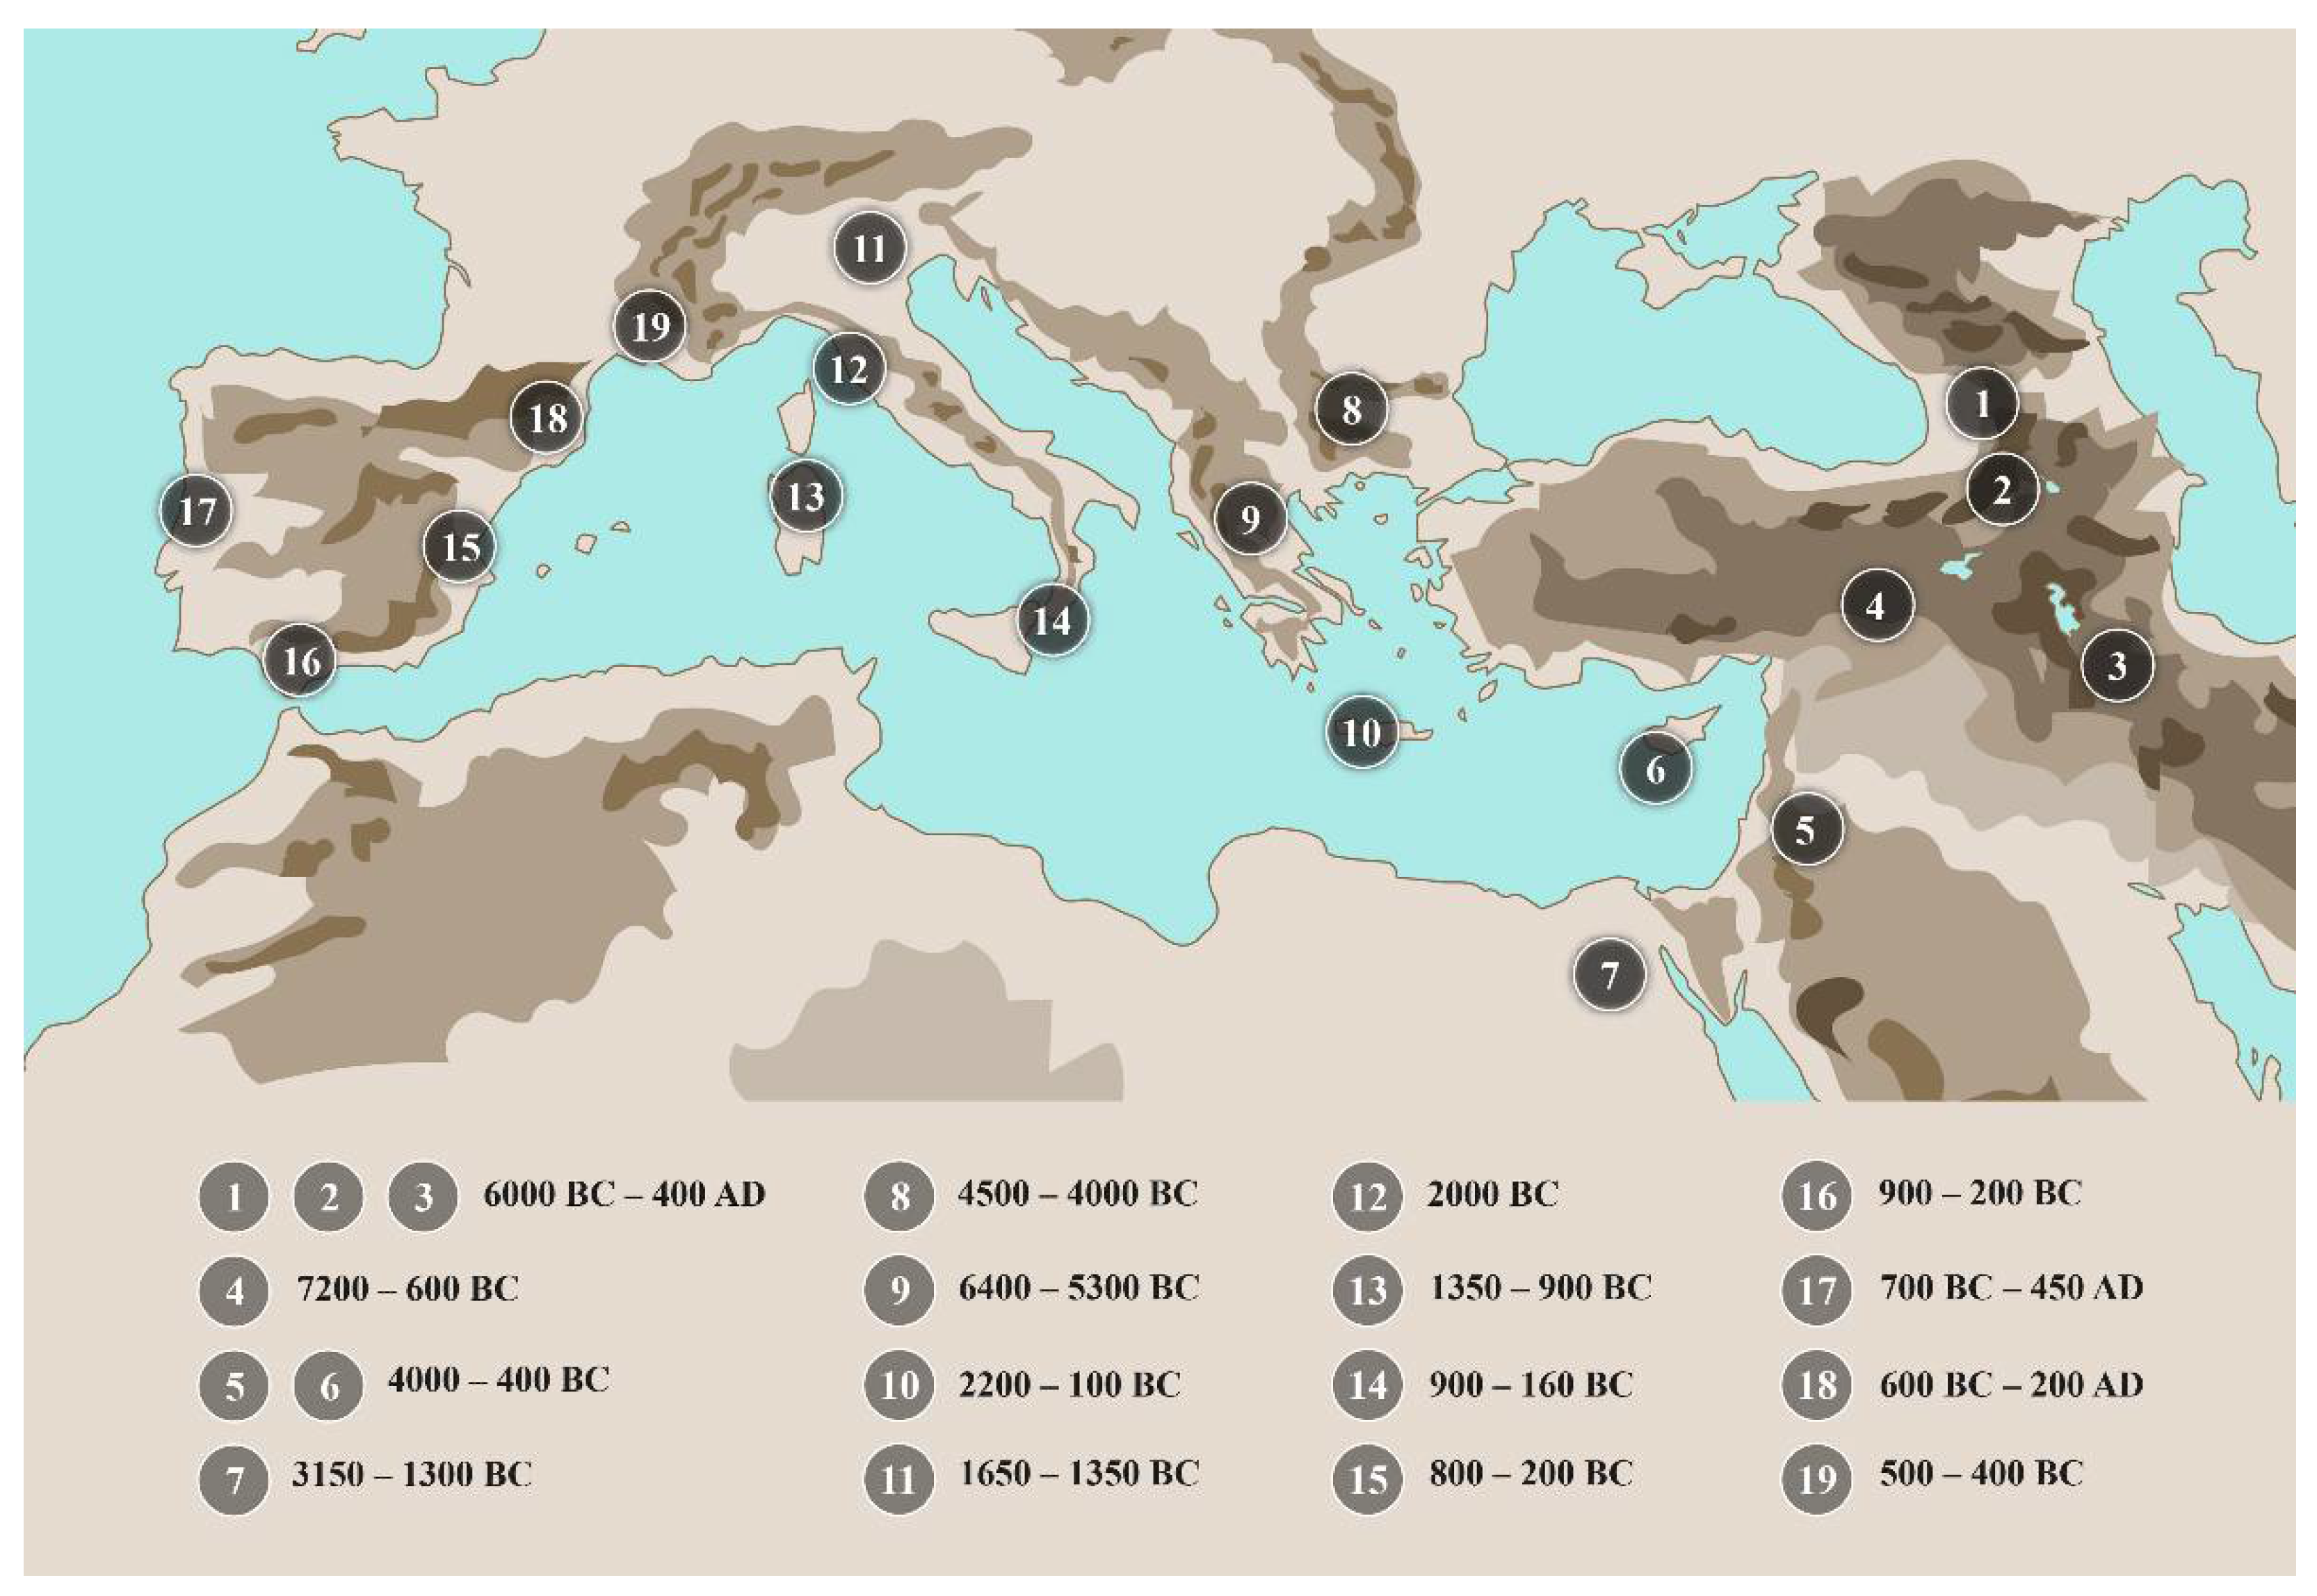 Heritage Free Full-Text The Rise of Wine among Ancient Civilizations across the Mediterranean Basin